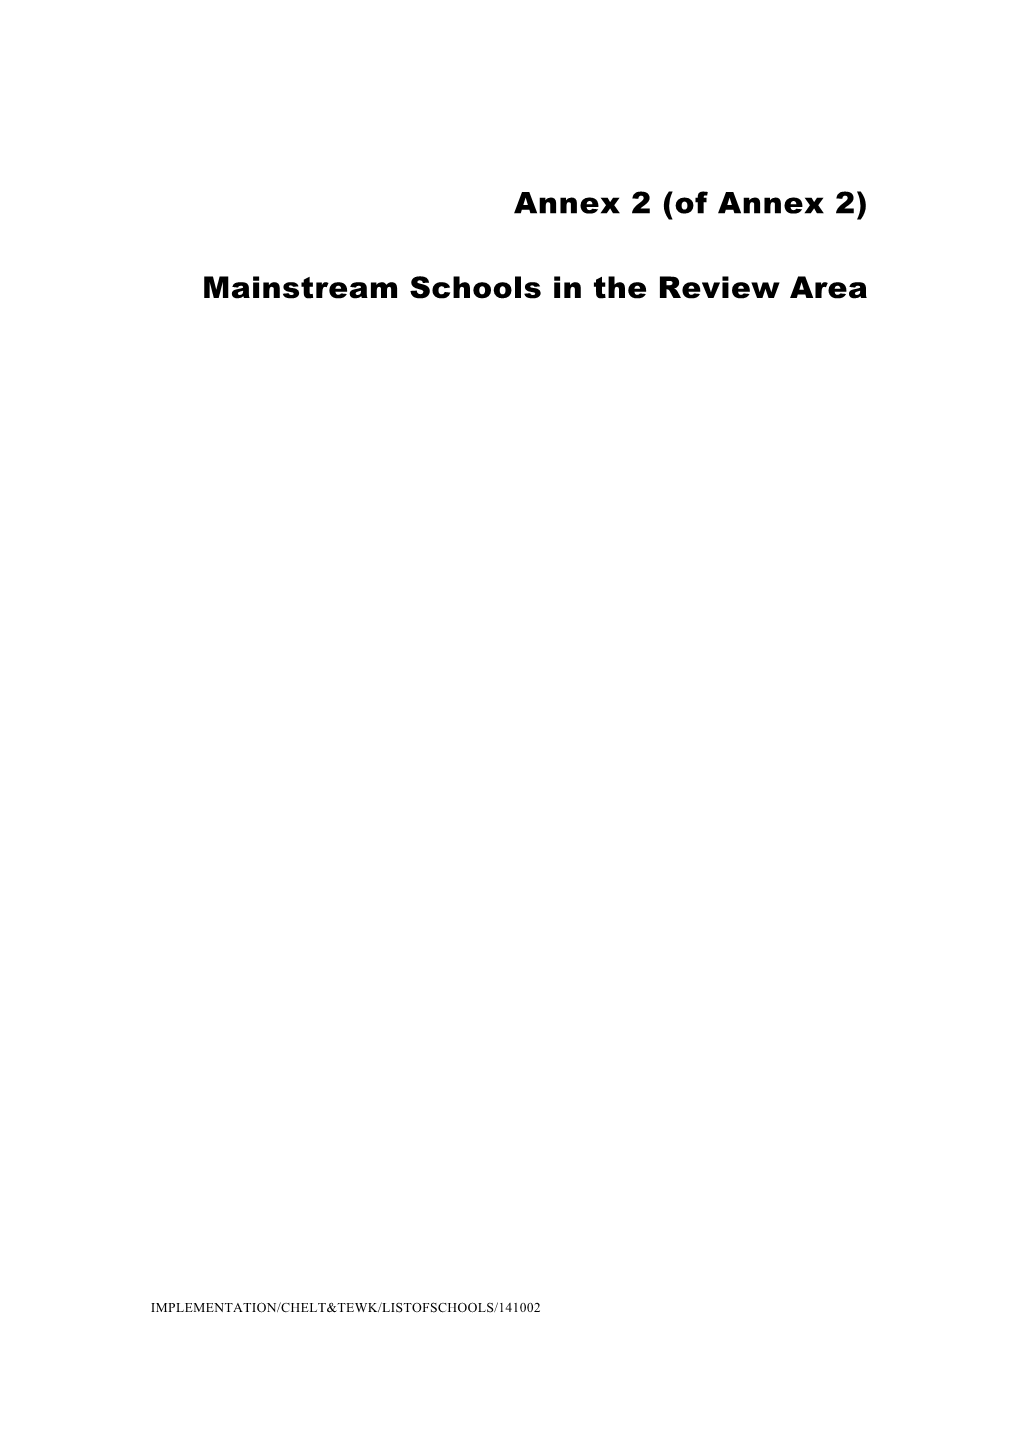 (Of Annex 2) Mainstream Schools in the Review Area